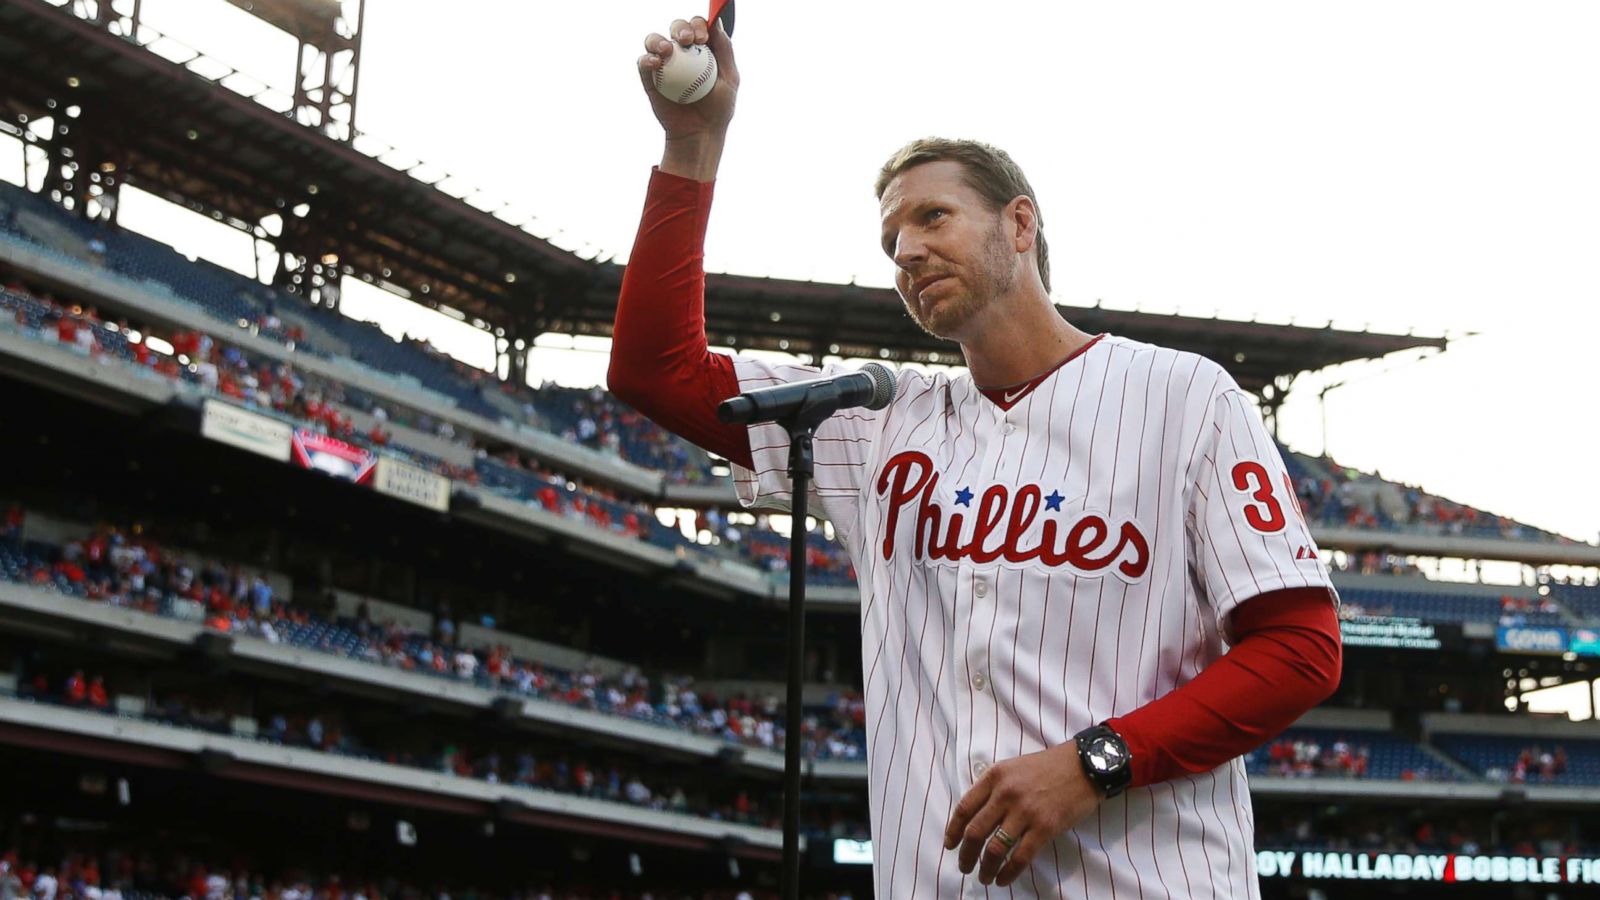 Roy Halladay crash report: Pitcher performed turns, skimmed the